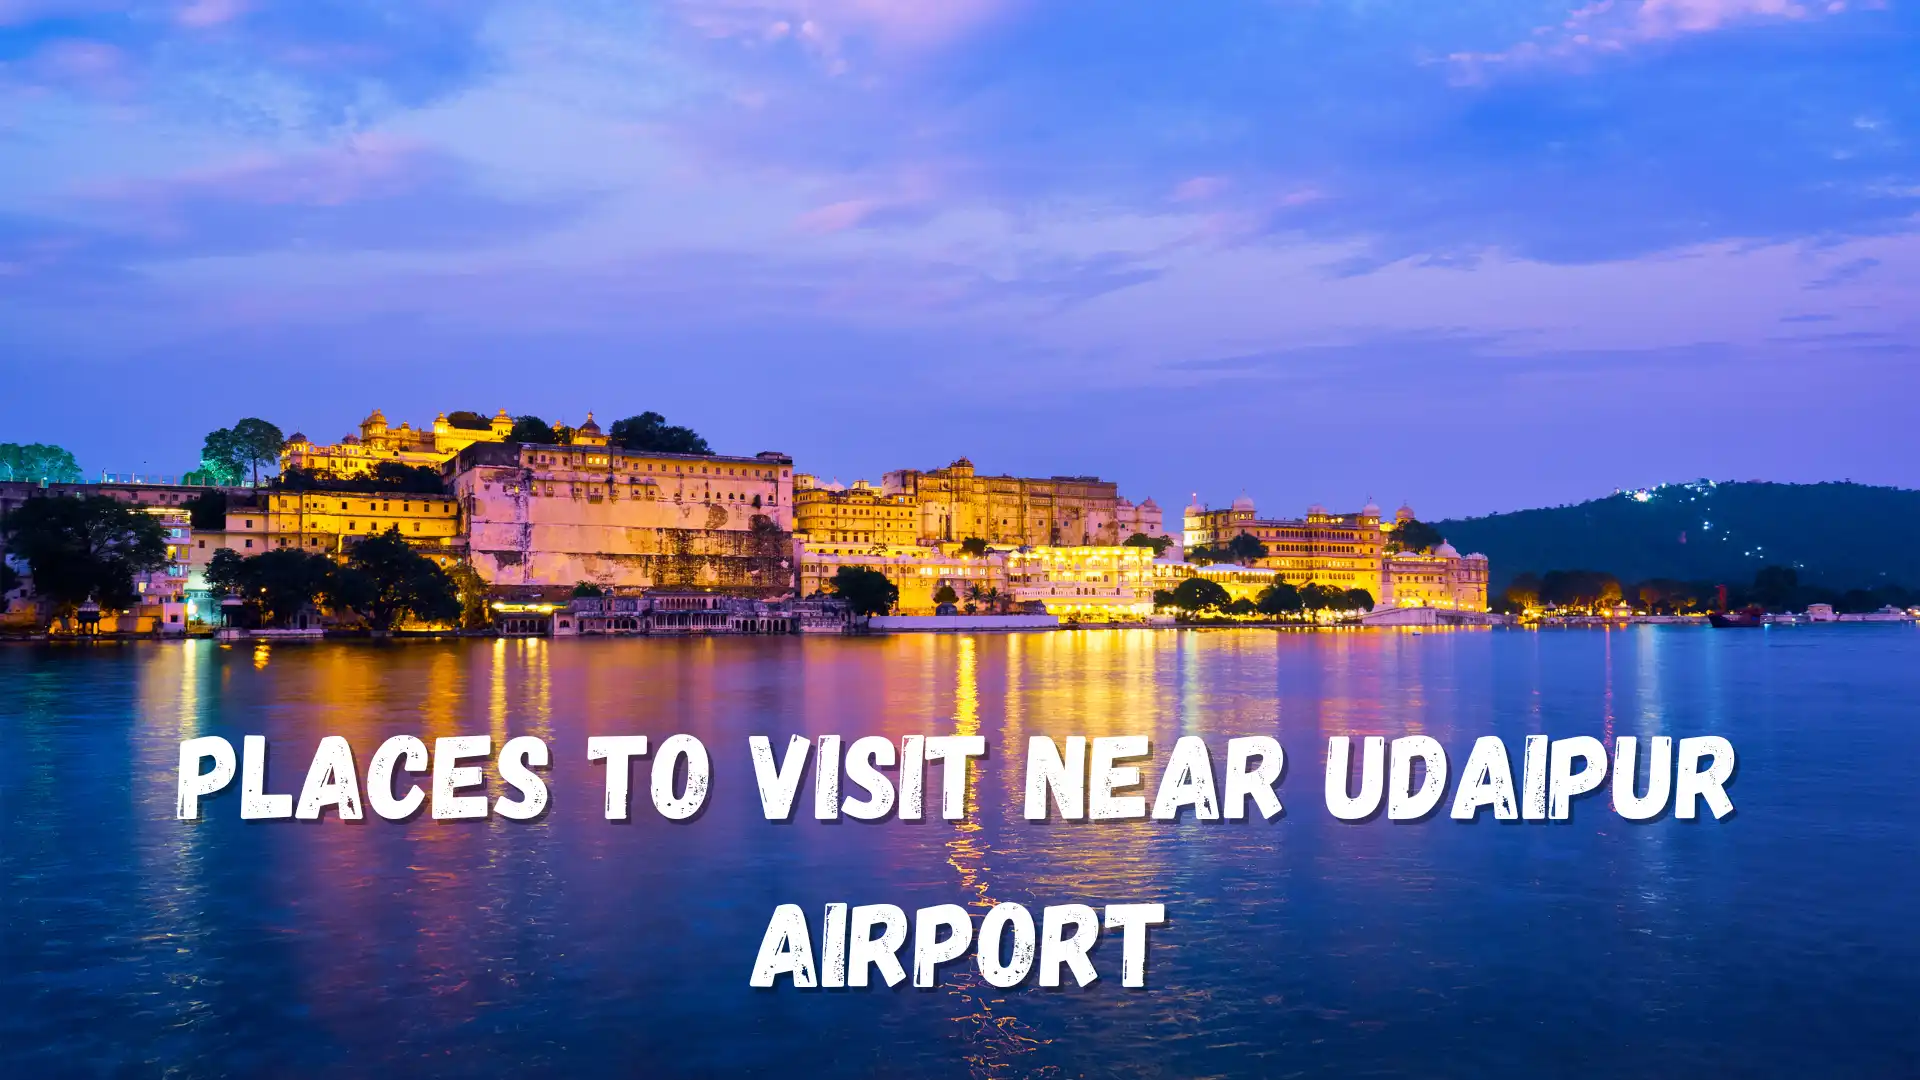 places to visit on the way to udaipur airport